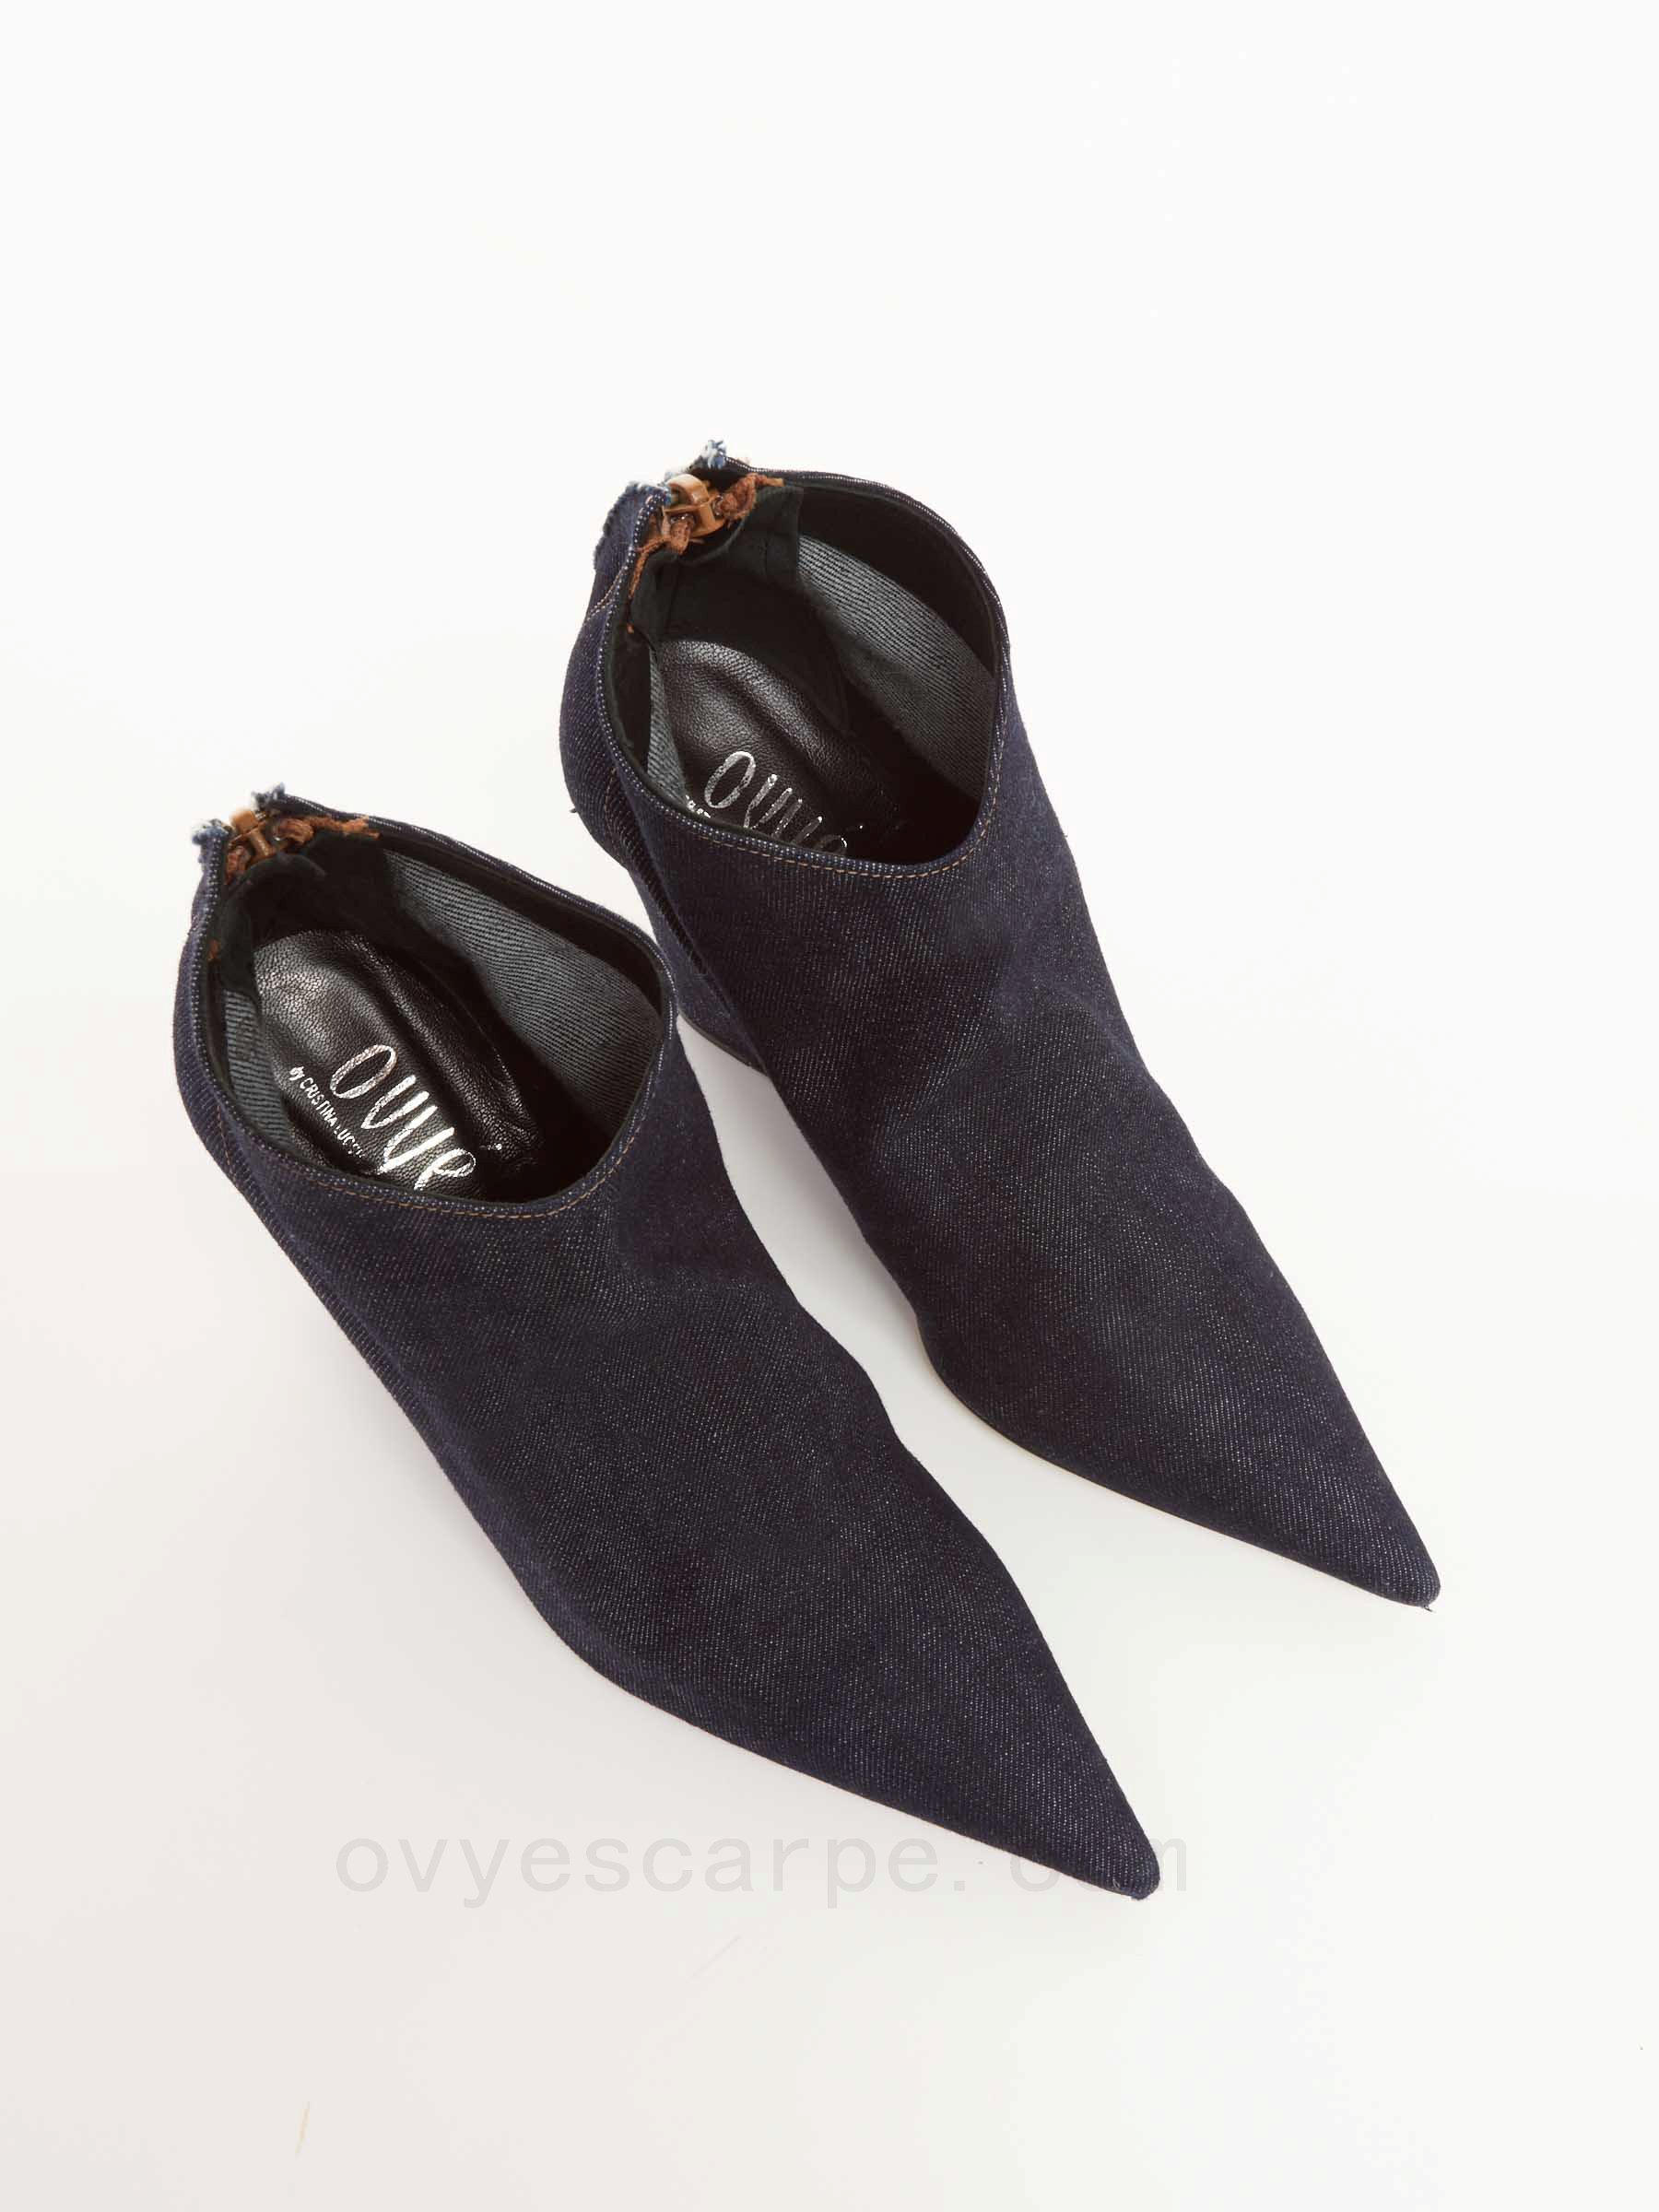 ovye shop Wedge Jeans Ankle Boots F08161027-0471 Al 70 Outlet